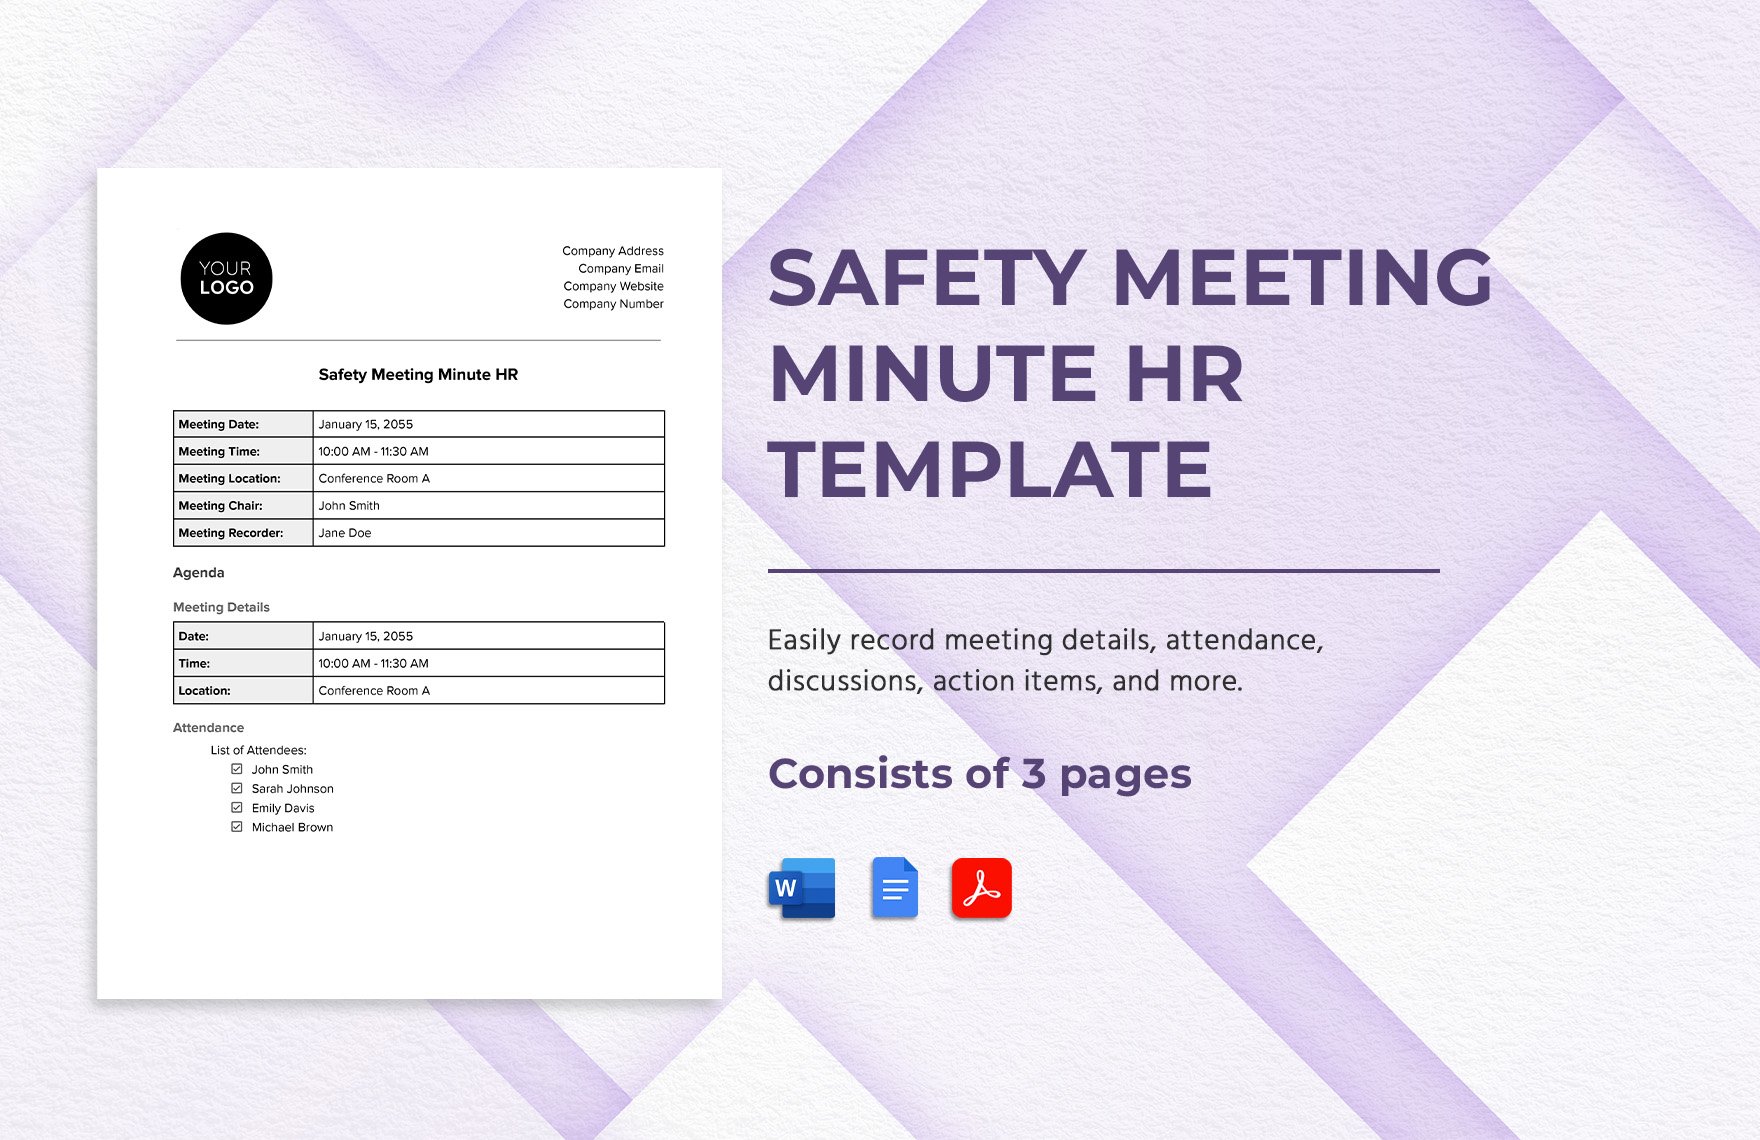 Safety Meeting Minute HR Template